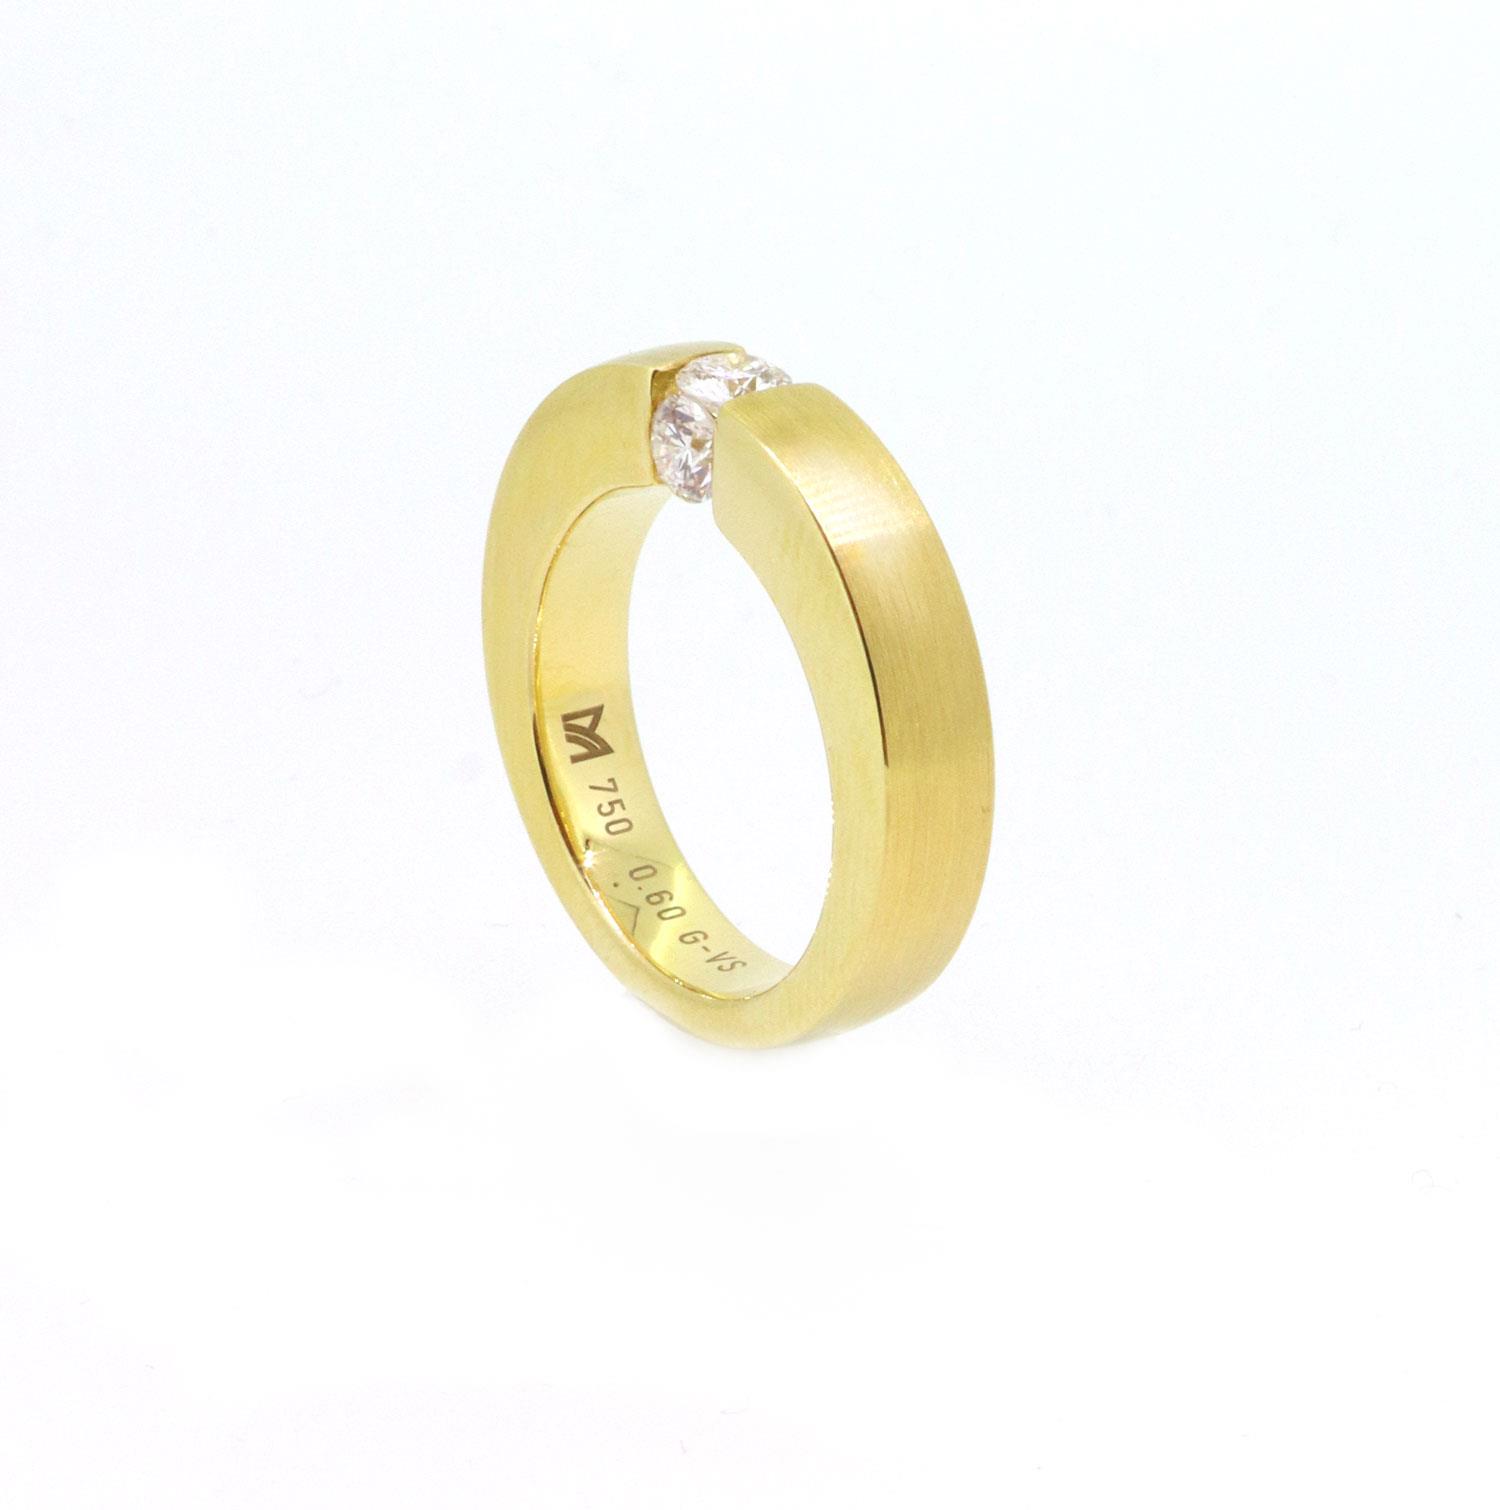 Ring Trilogy 0,60ct 18kt Gelbgold - Meister - 117.8105.00